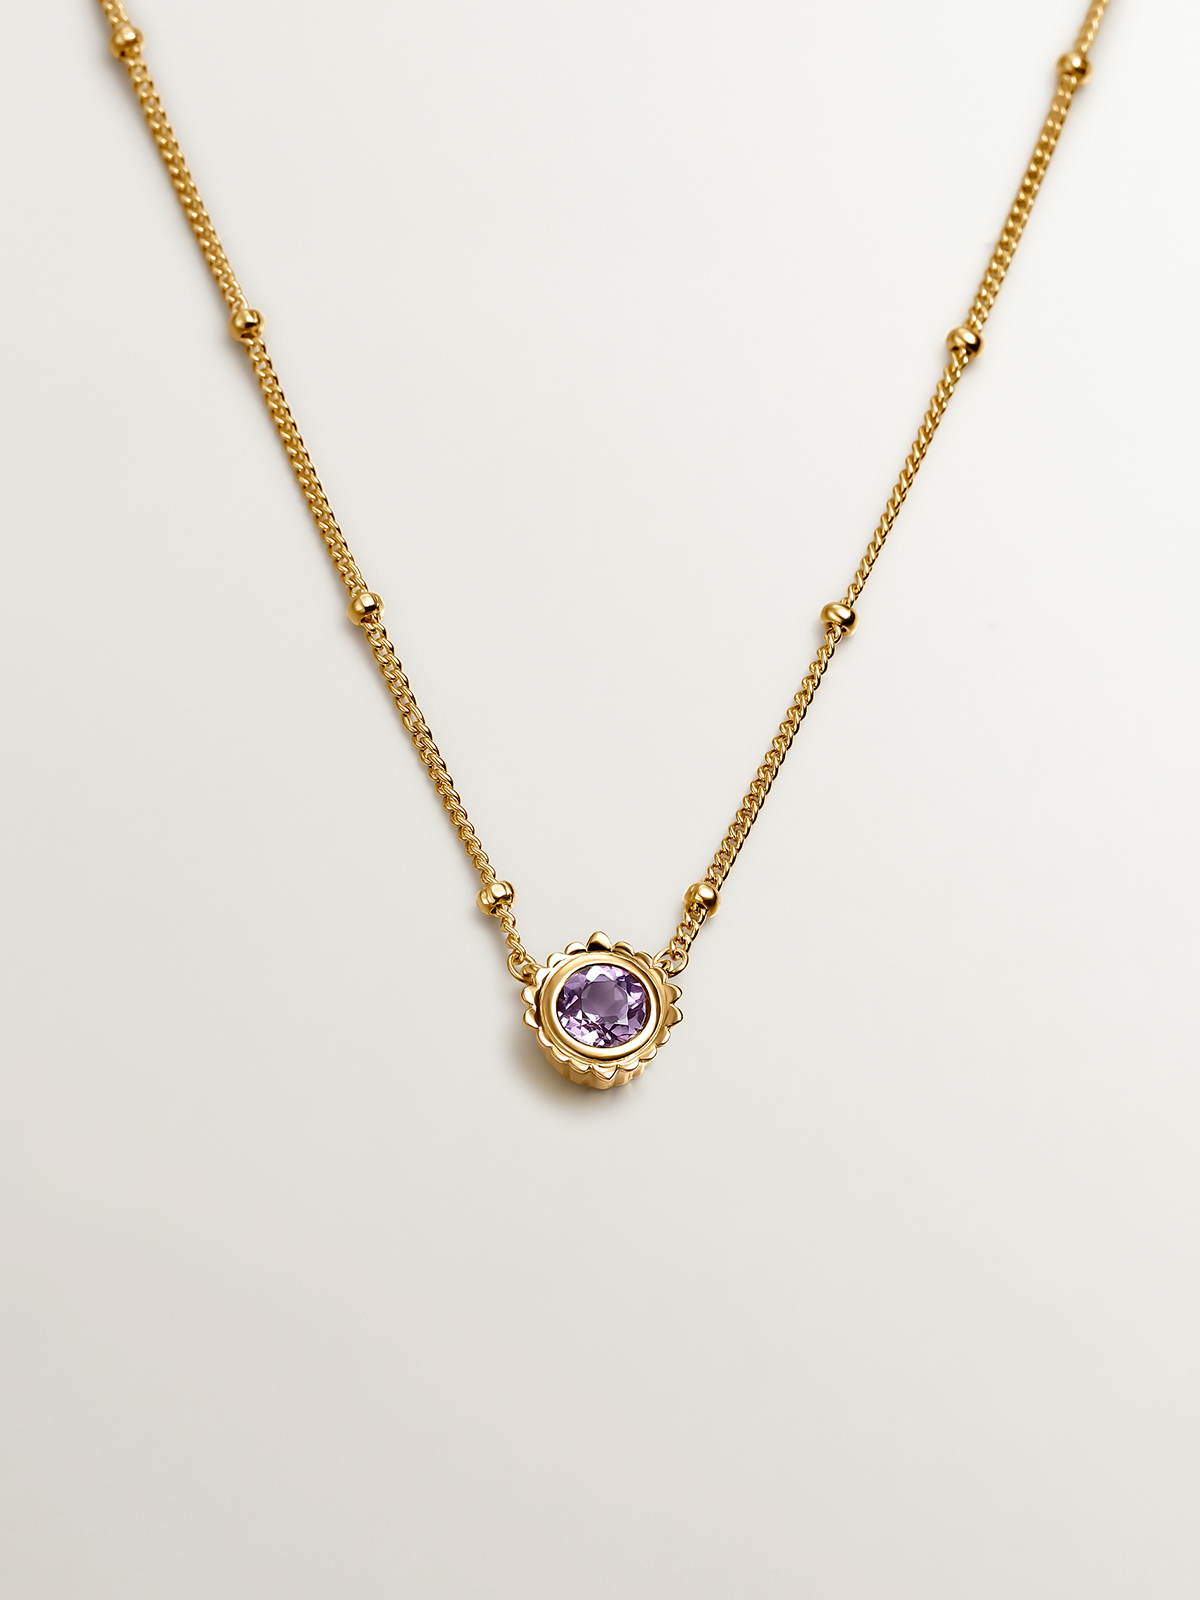 925 Silver Pendant bathed in 18K yellow gold with purple amethyst.